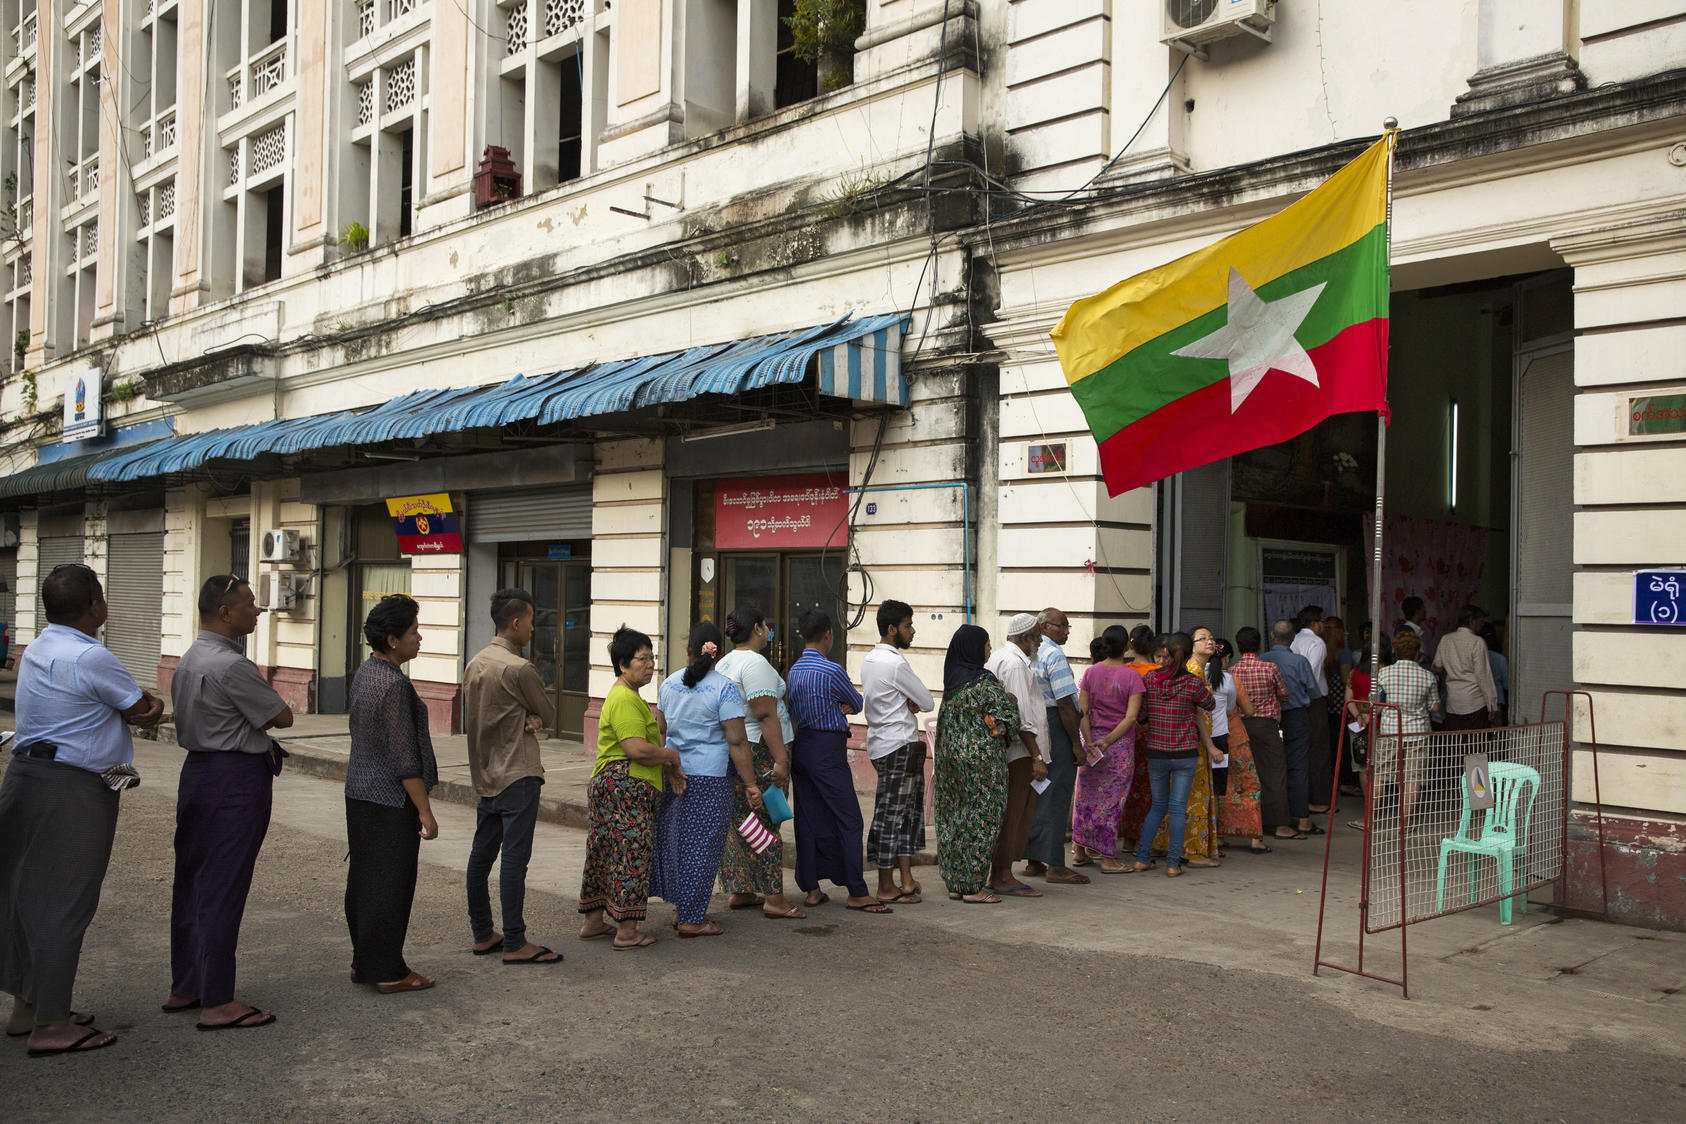 Voters line up outside a polling station in Yangon, Myanmar, Nov. 8, 2015. Photo Courtesy of The New York Times/Adam Dean